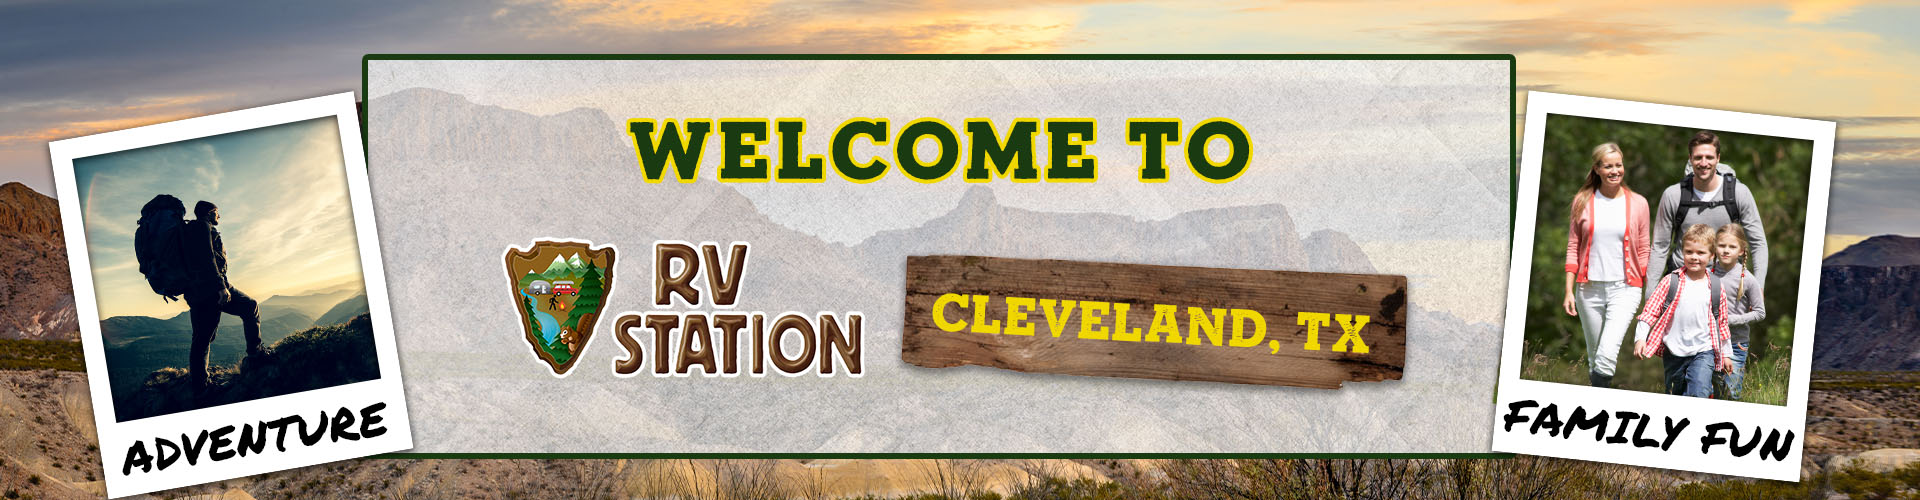 Welcome to RV Station - Cleveland